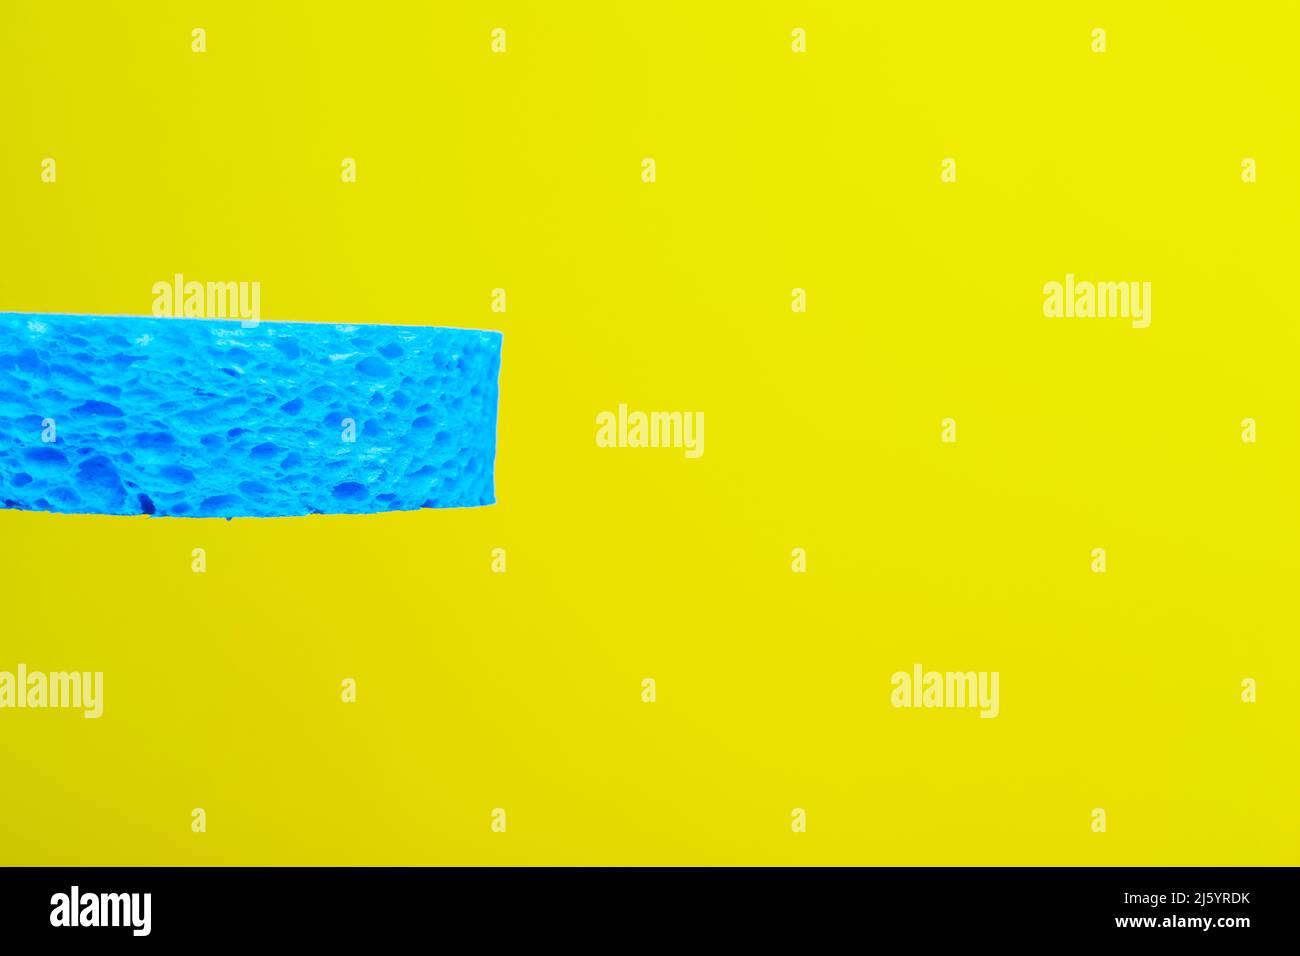 a blue sponge in front of a yellow background Stock Photo